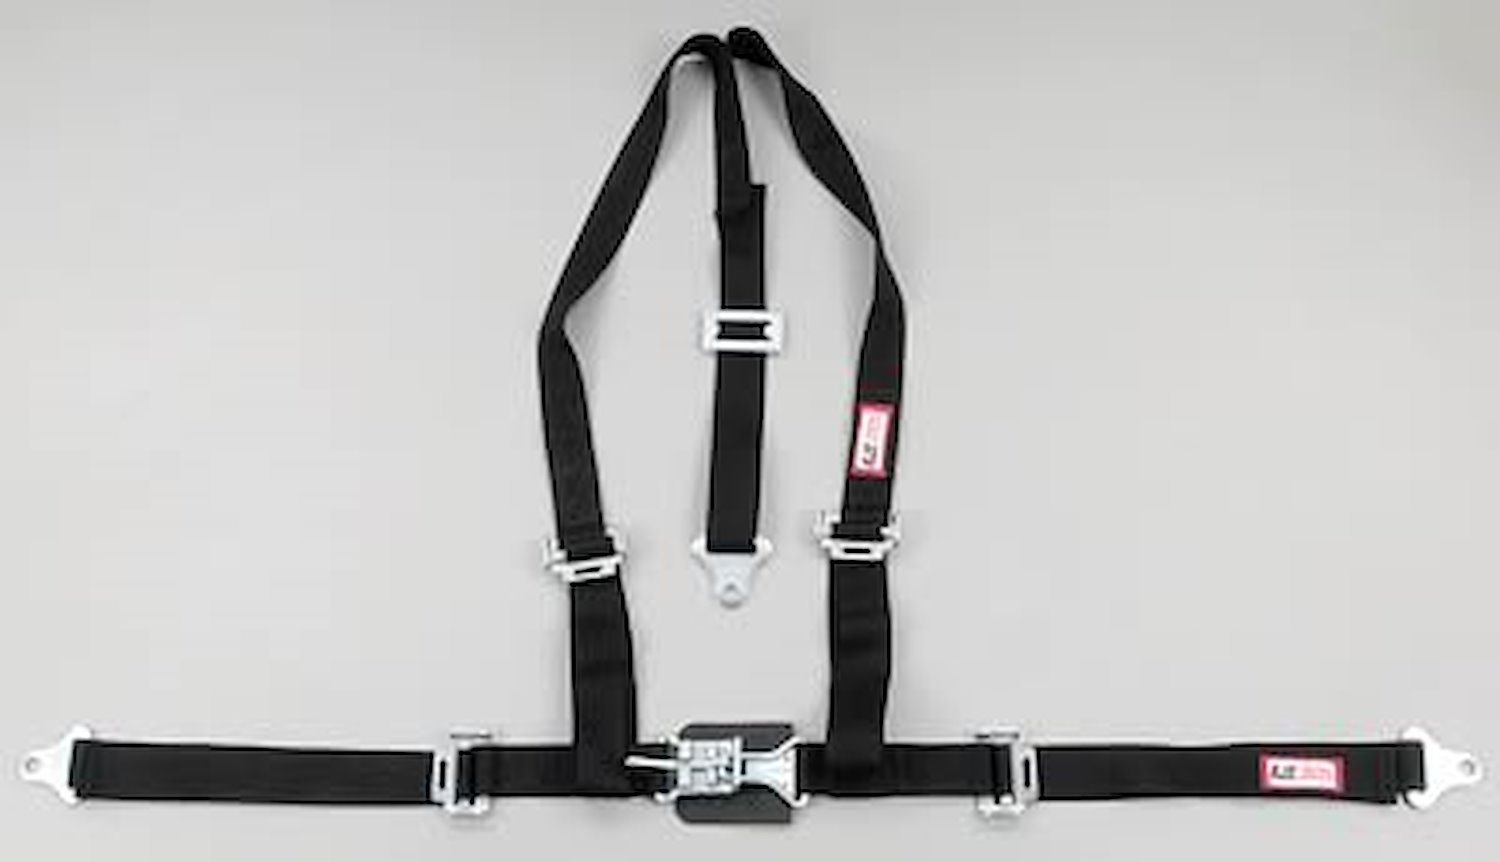 NON-SFI L&L HARNESS 3 PULL DOWN Lap Belt SEWN IN 2 Shoulder Harness V ROLL BAR Mount ALL WRAP ENDS PURPLE